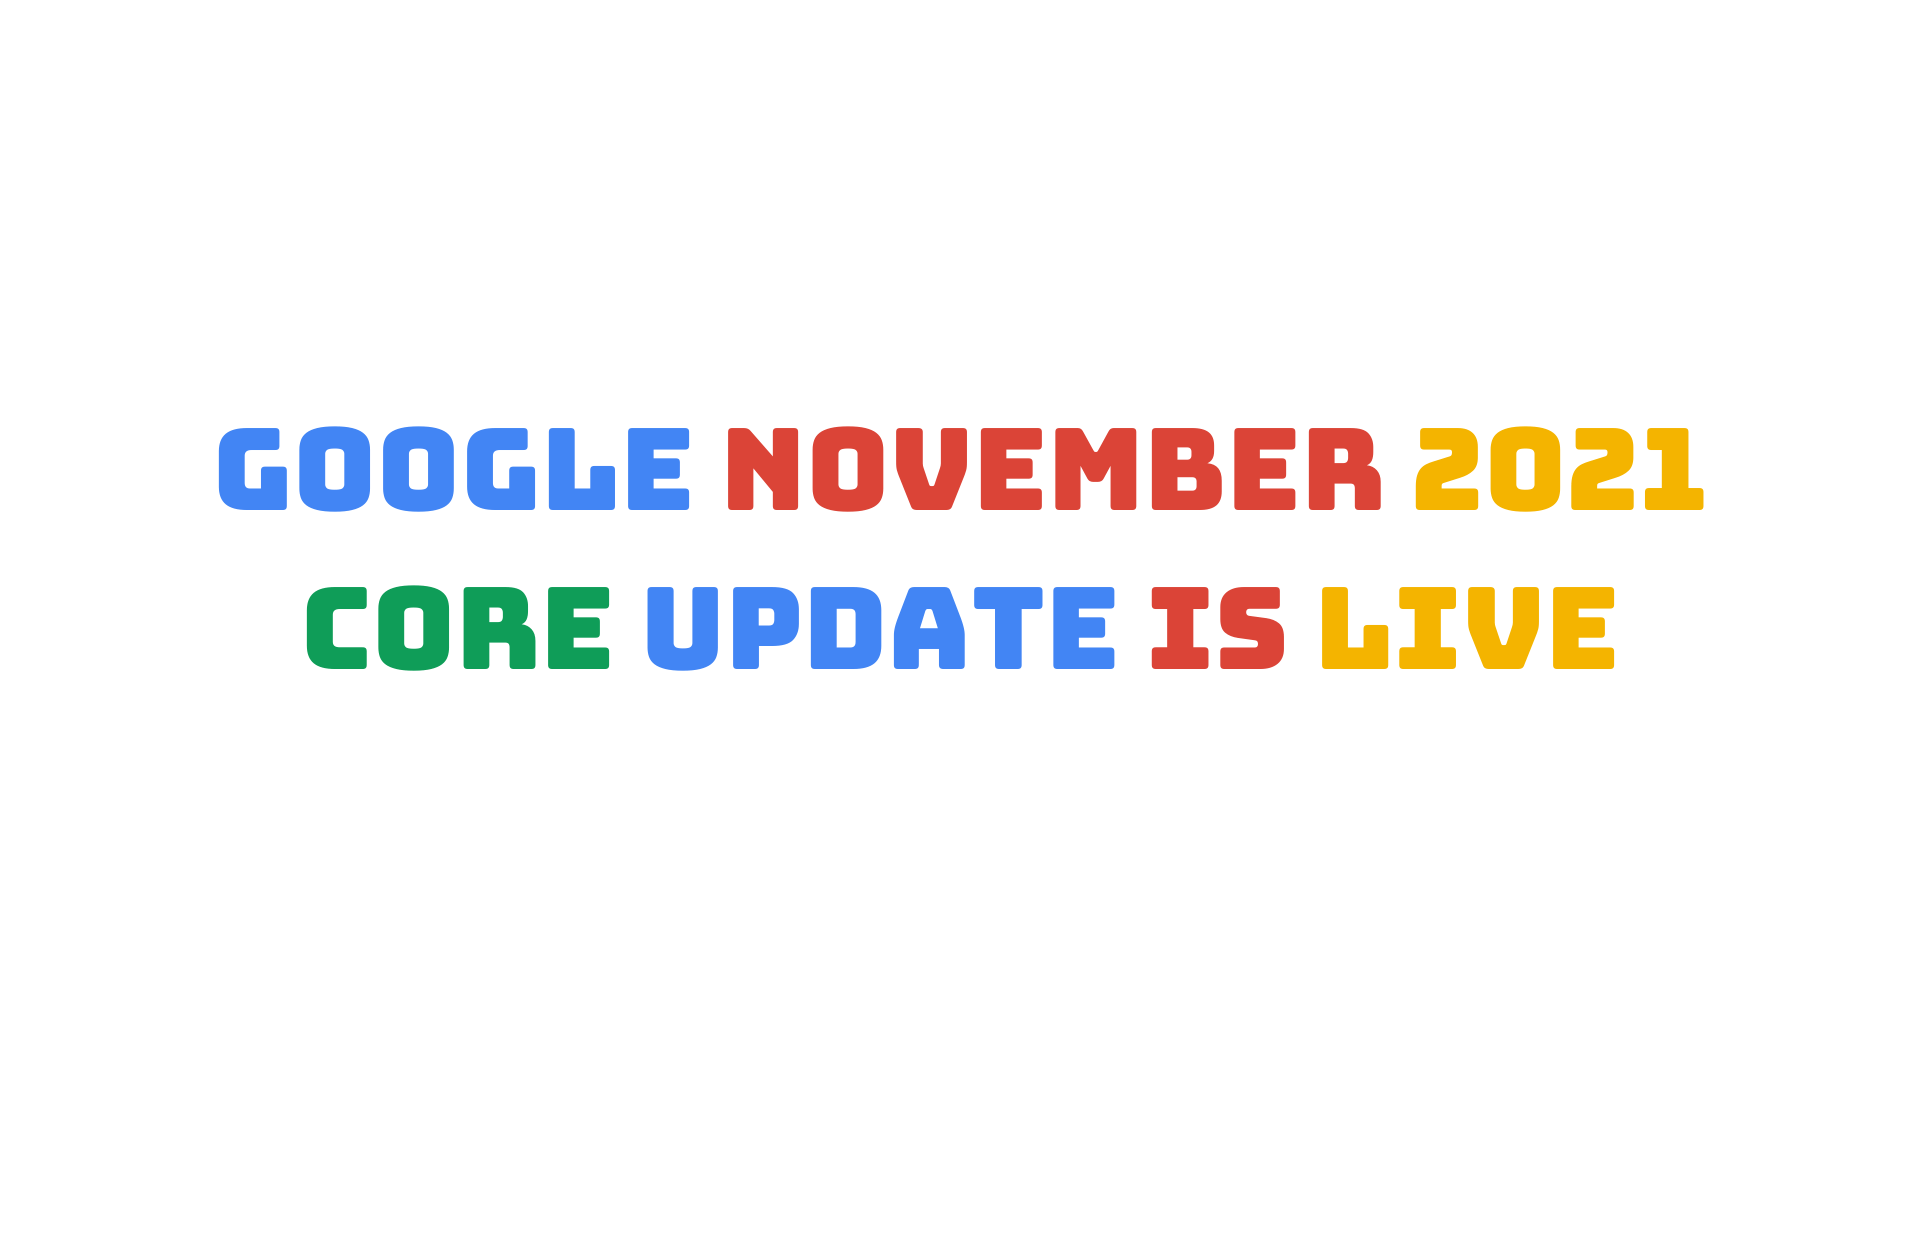 What We Are Seeing Now With Google's November 2021 Core Update